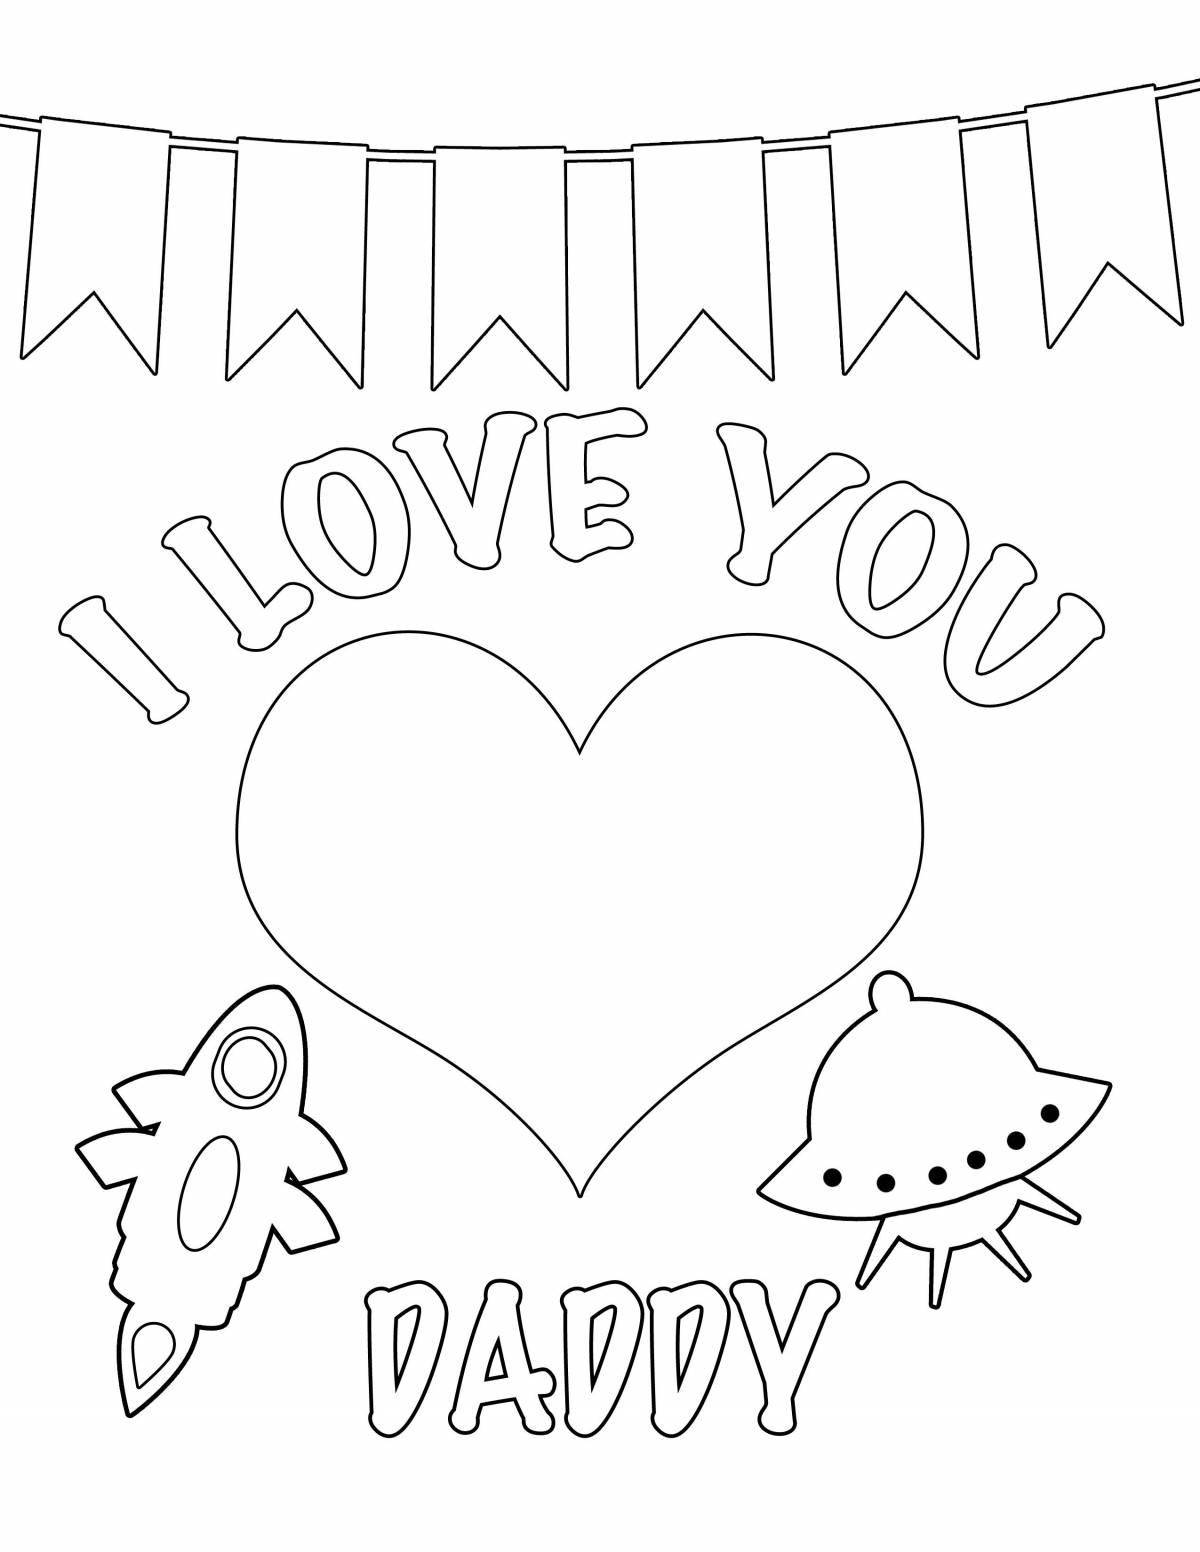 Great gift for dad coloring book